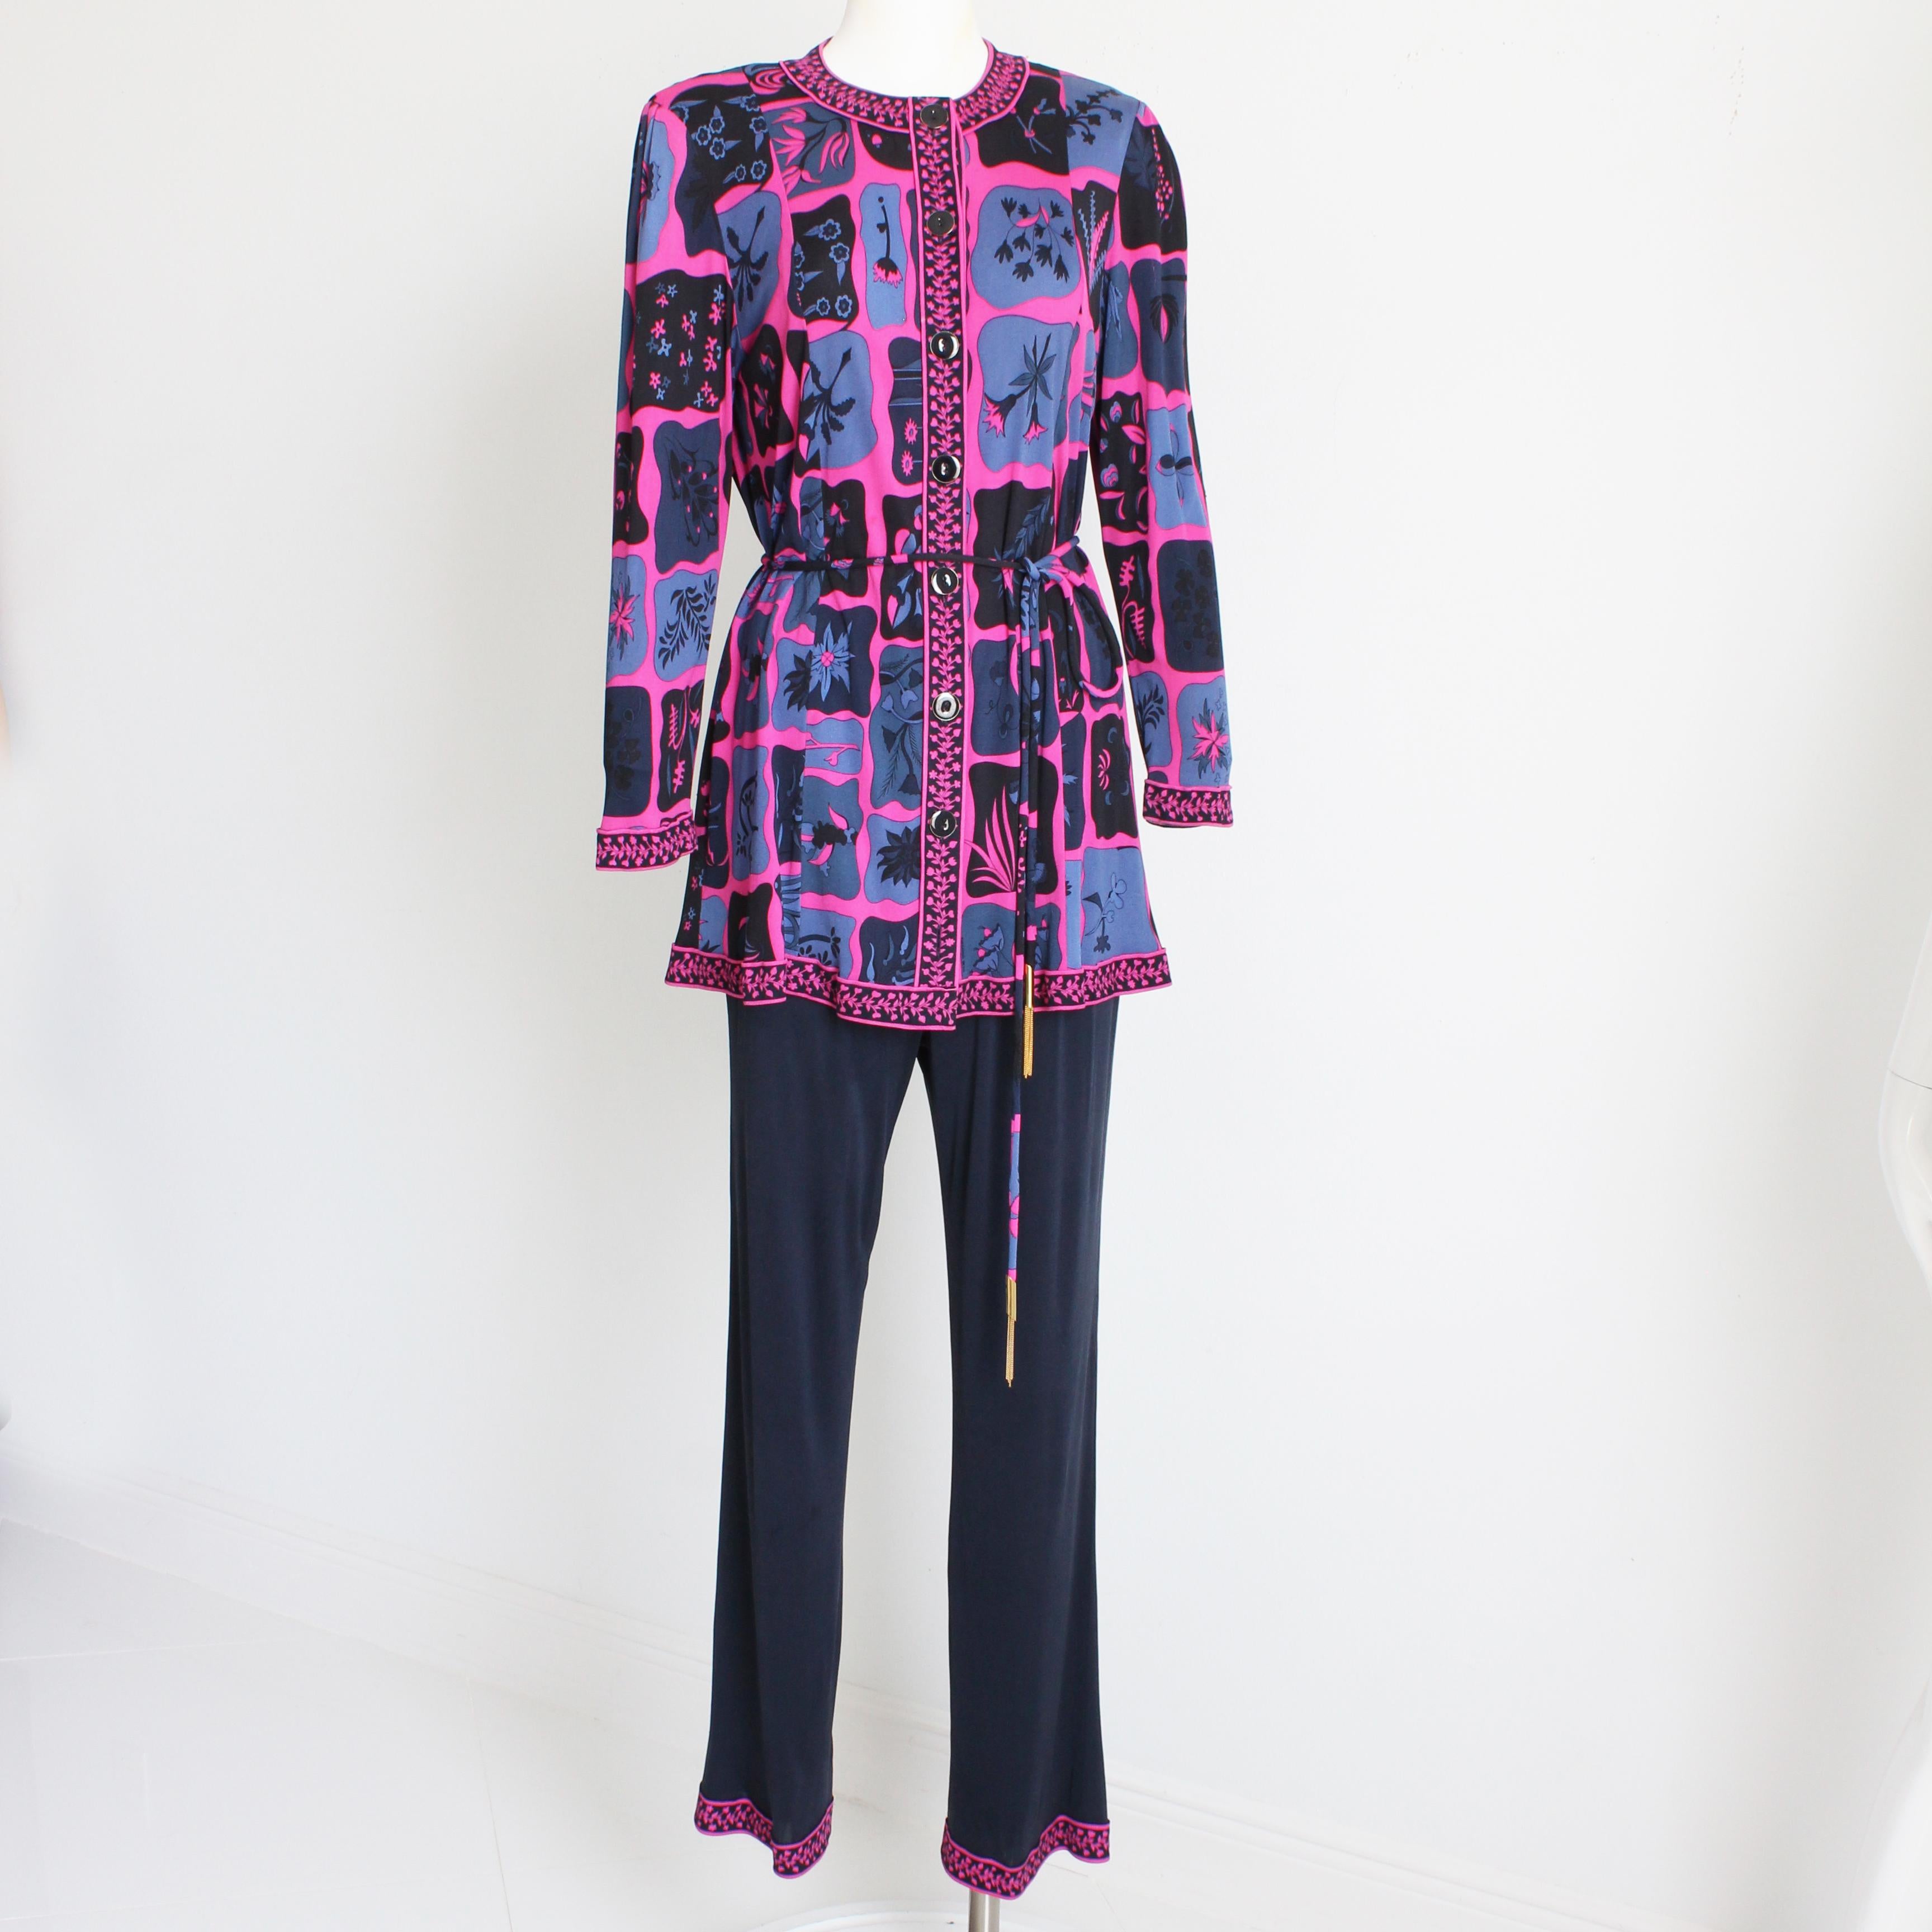 Here's a vibrant print 3pc pants suit from Averardo Bessi, likely made in the early 90s.  The colors on this set are stunning, with shades of violet, indigo, bright lavender and slate blue!  Made from silk jersey fabric, the top is cut long and